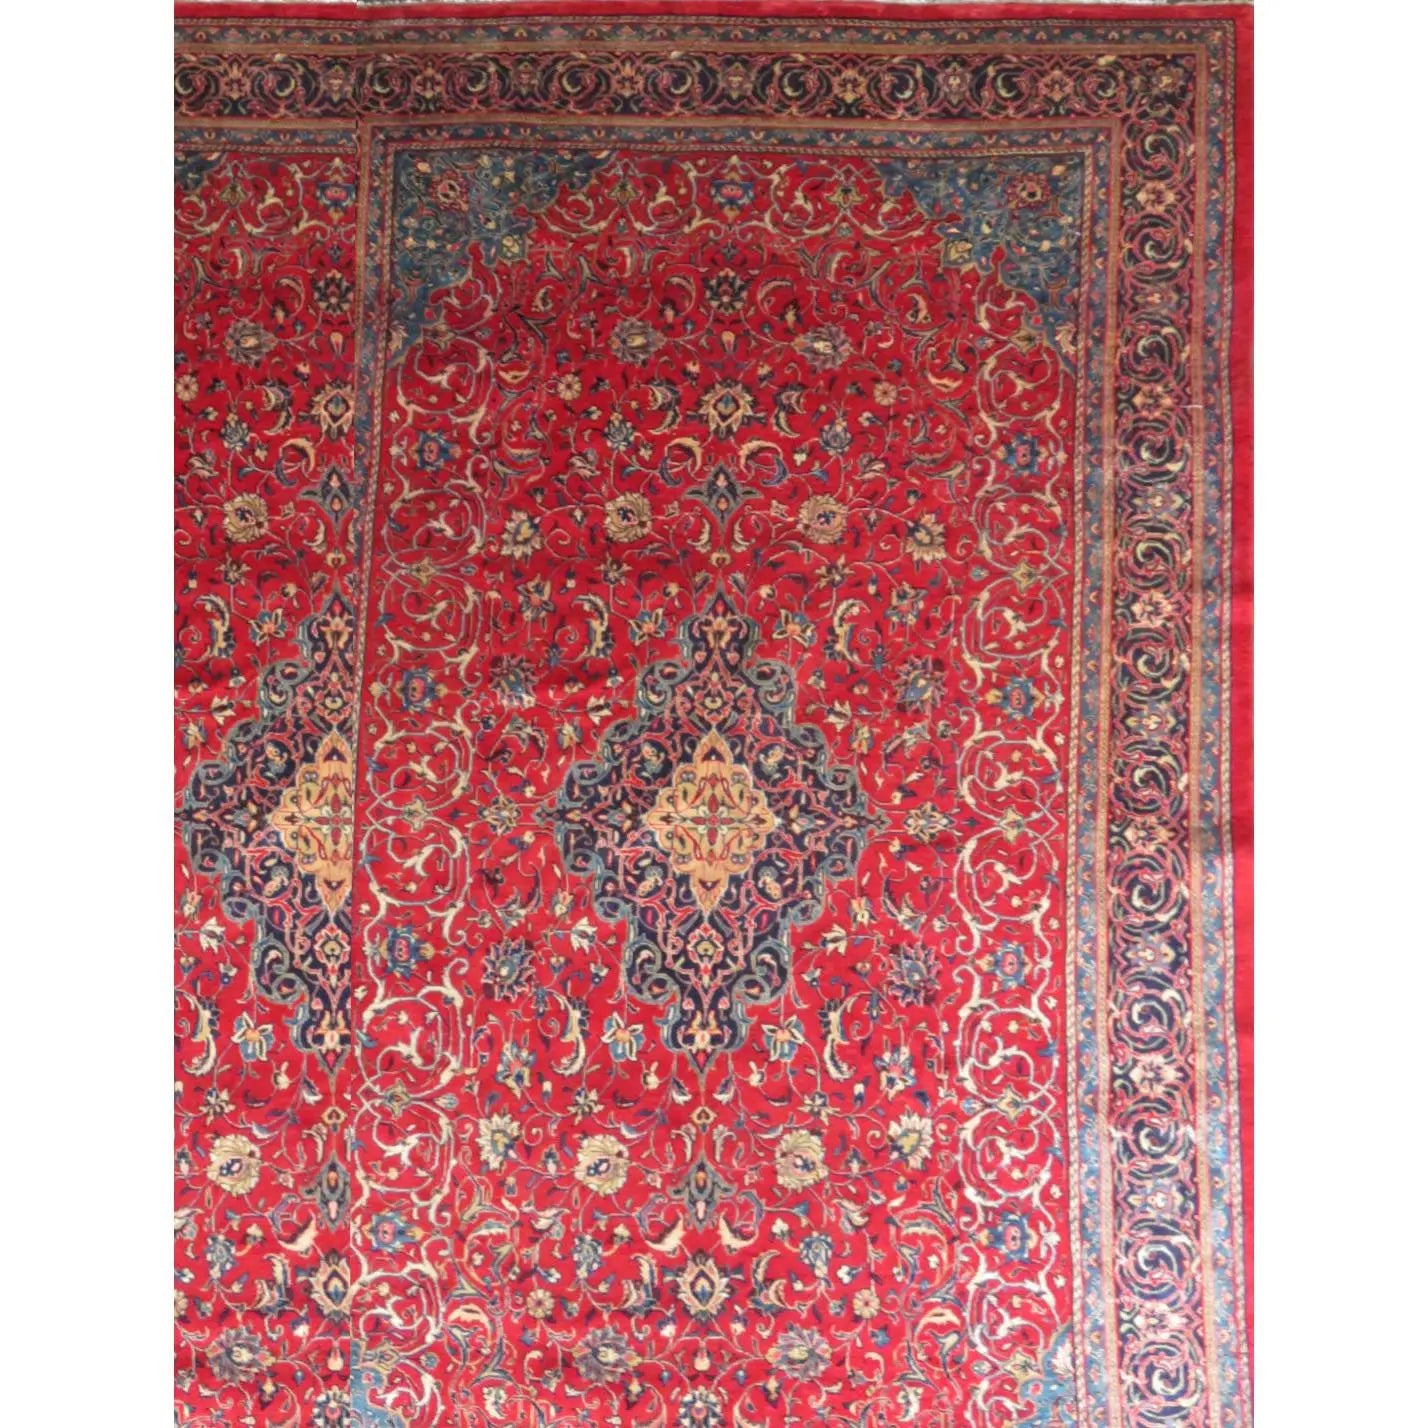 Hand-Knotted Persian Wool Rug _ Luxurious Vintage Design, 16'7" x 9'5", Artisan Crafted